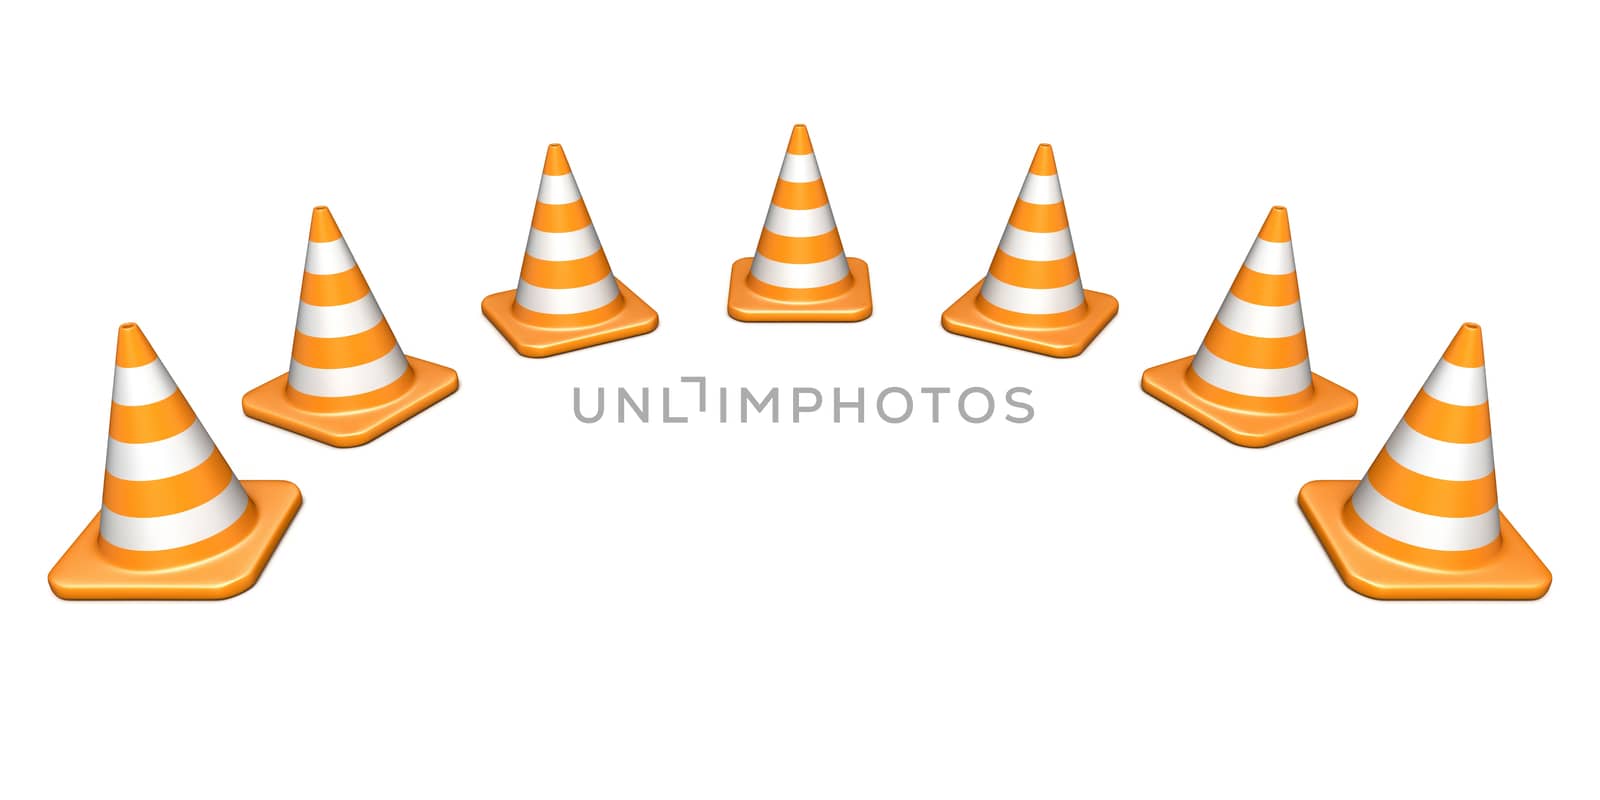 Traffic cones shaped arc 3D by djmilic